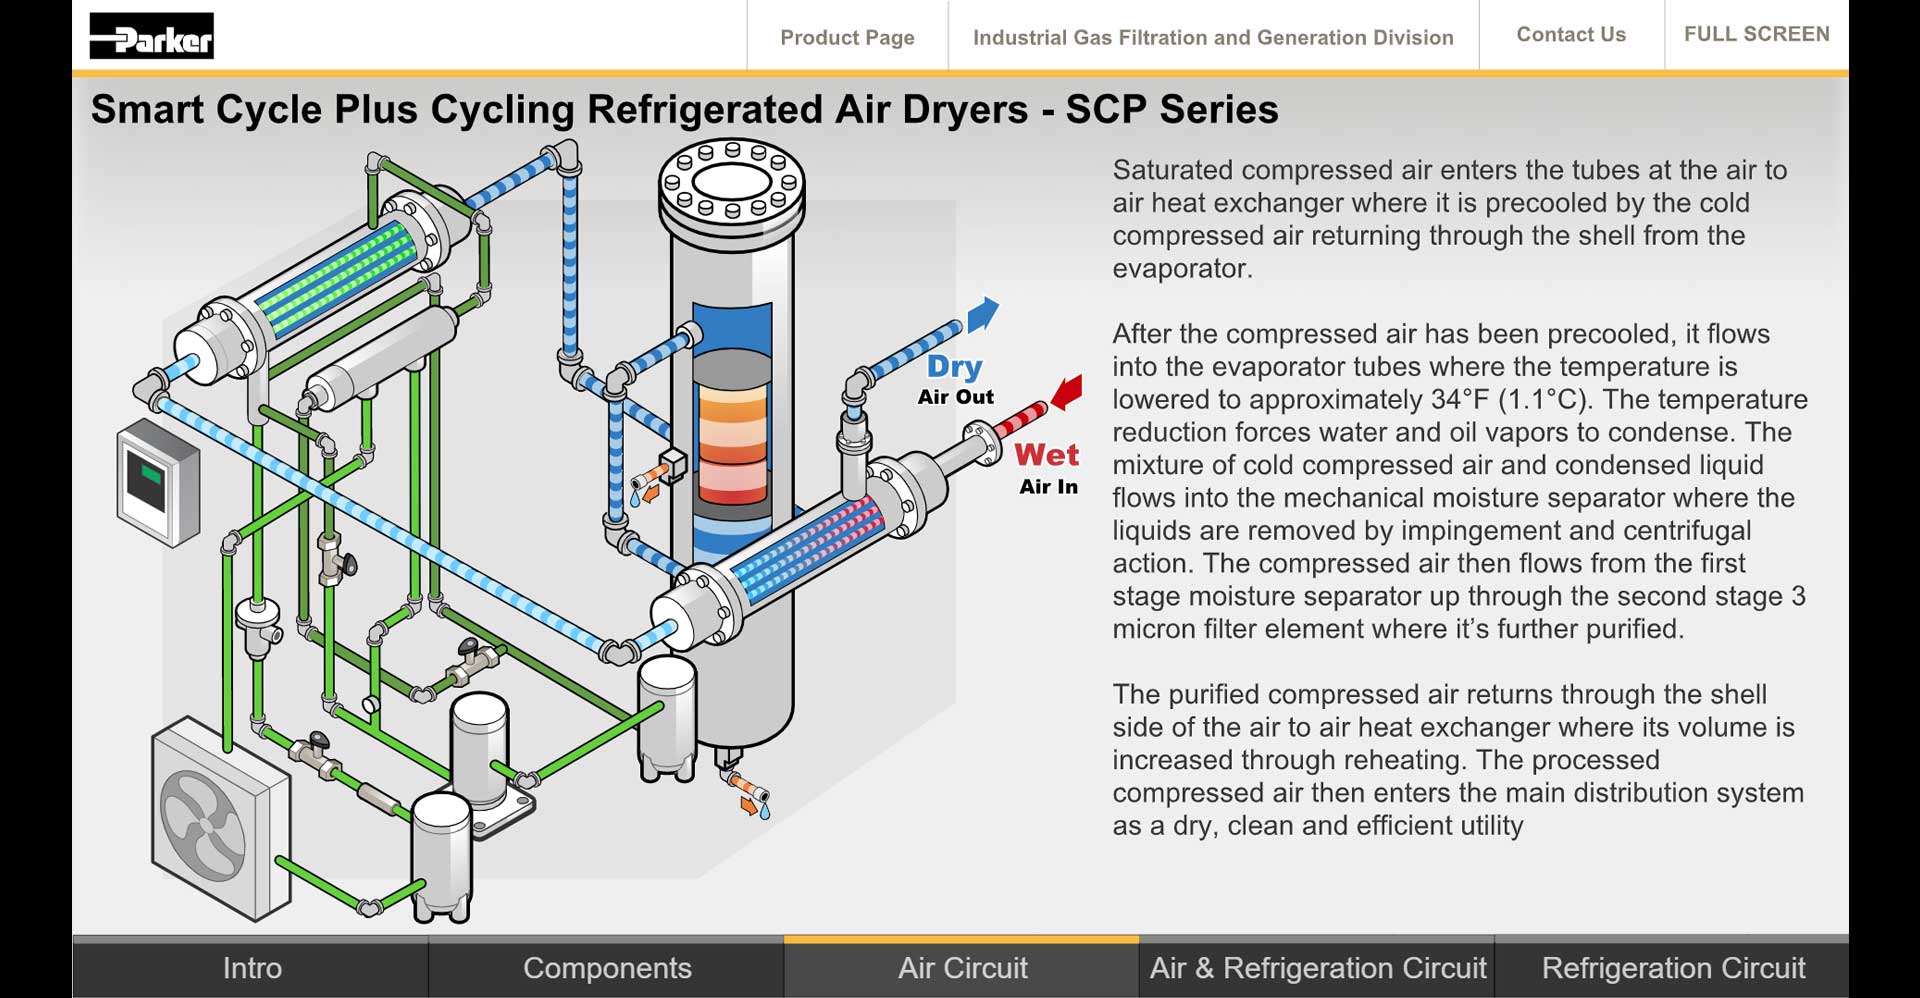 Smart Cycle Plus Cycling Refrigerated Air Dryers - SCP SERIES